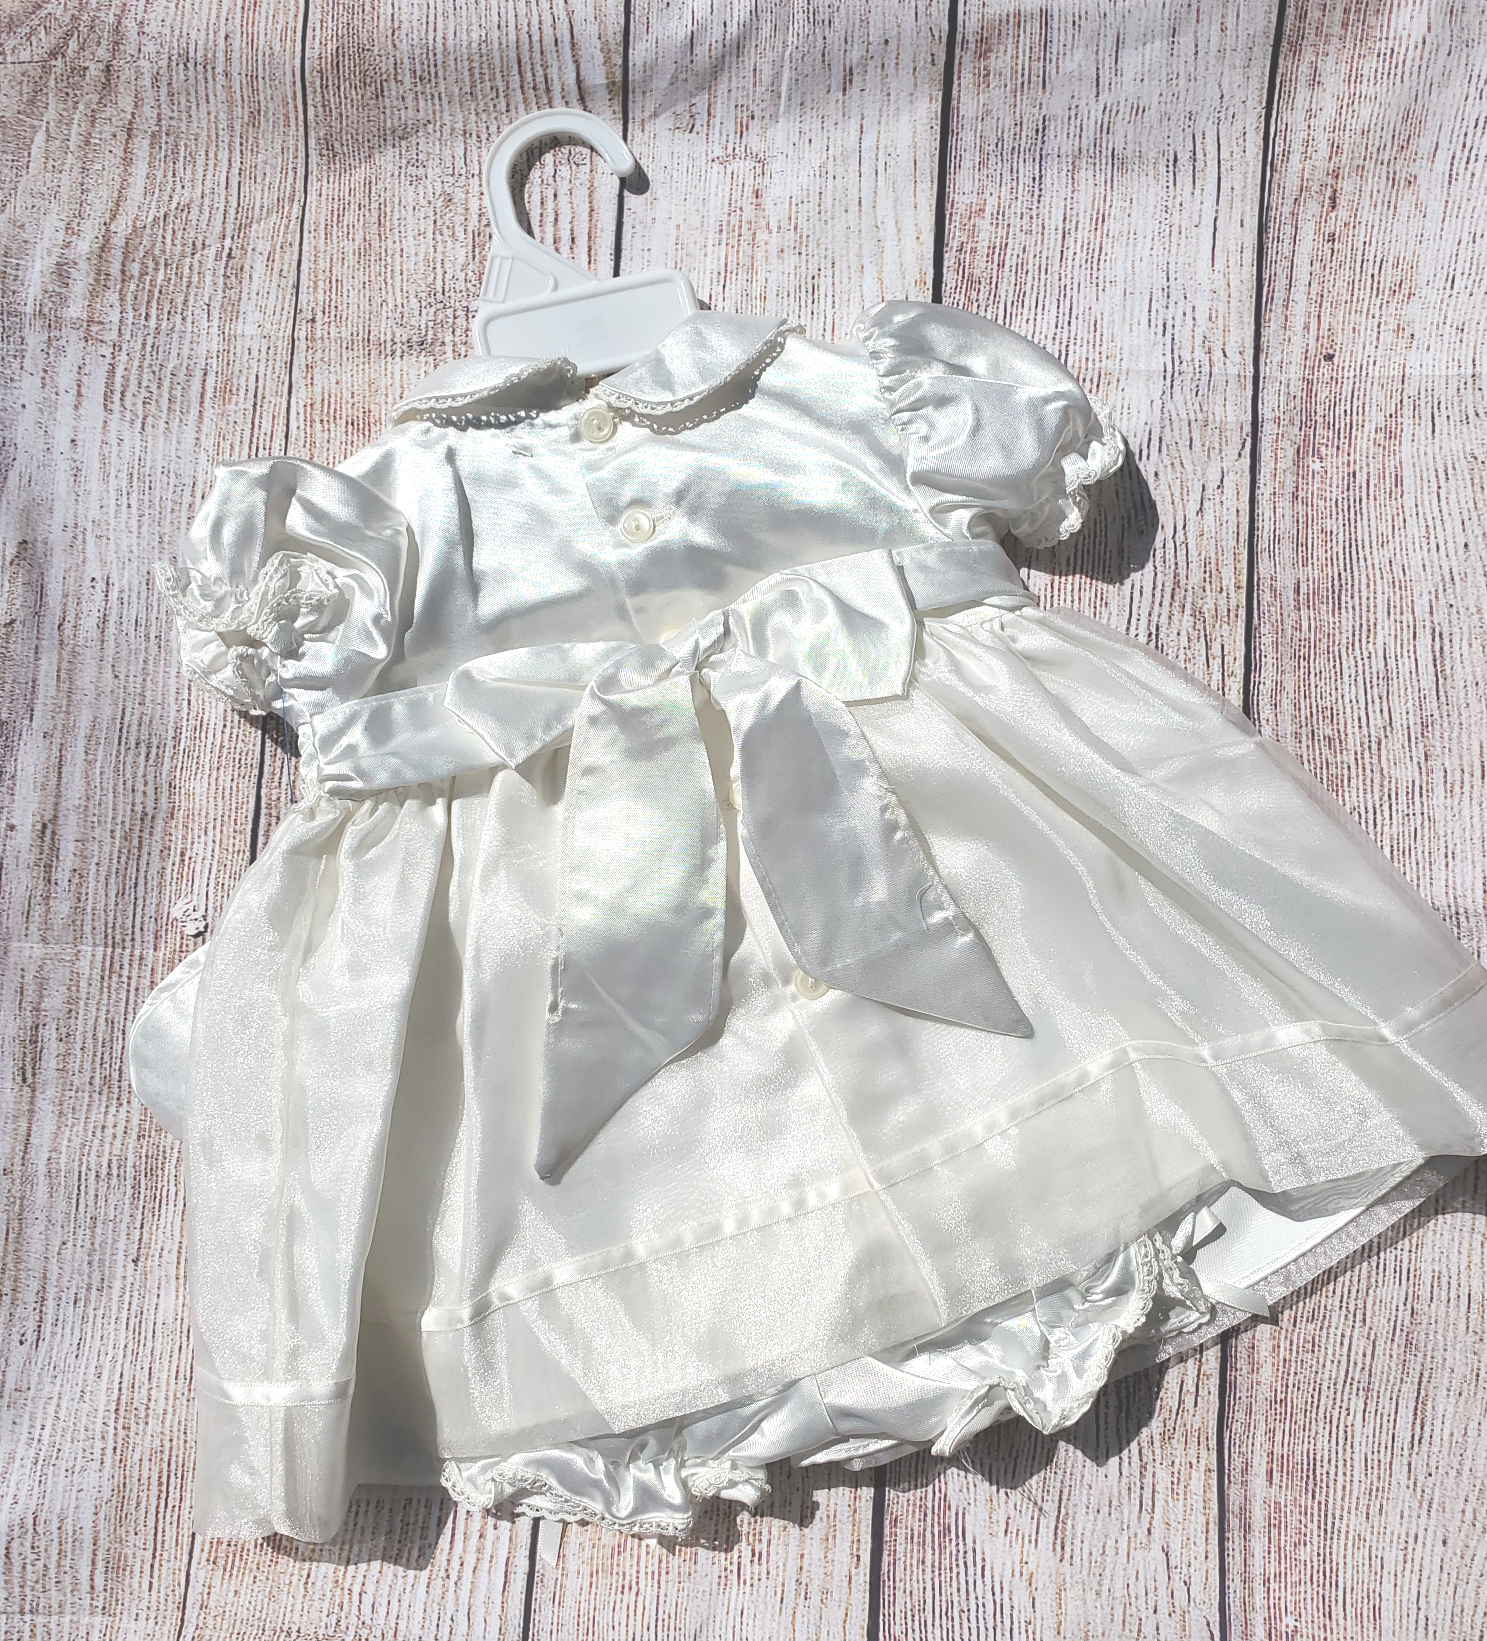 Baby Girl New white dress with slippers sz 3-6 months